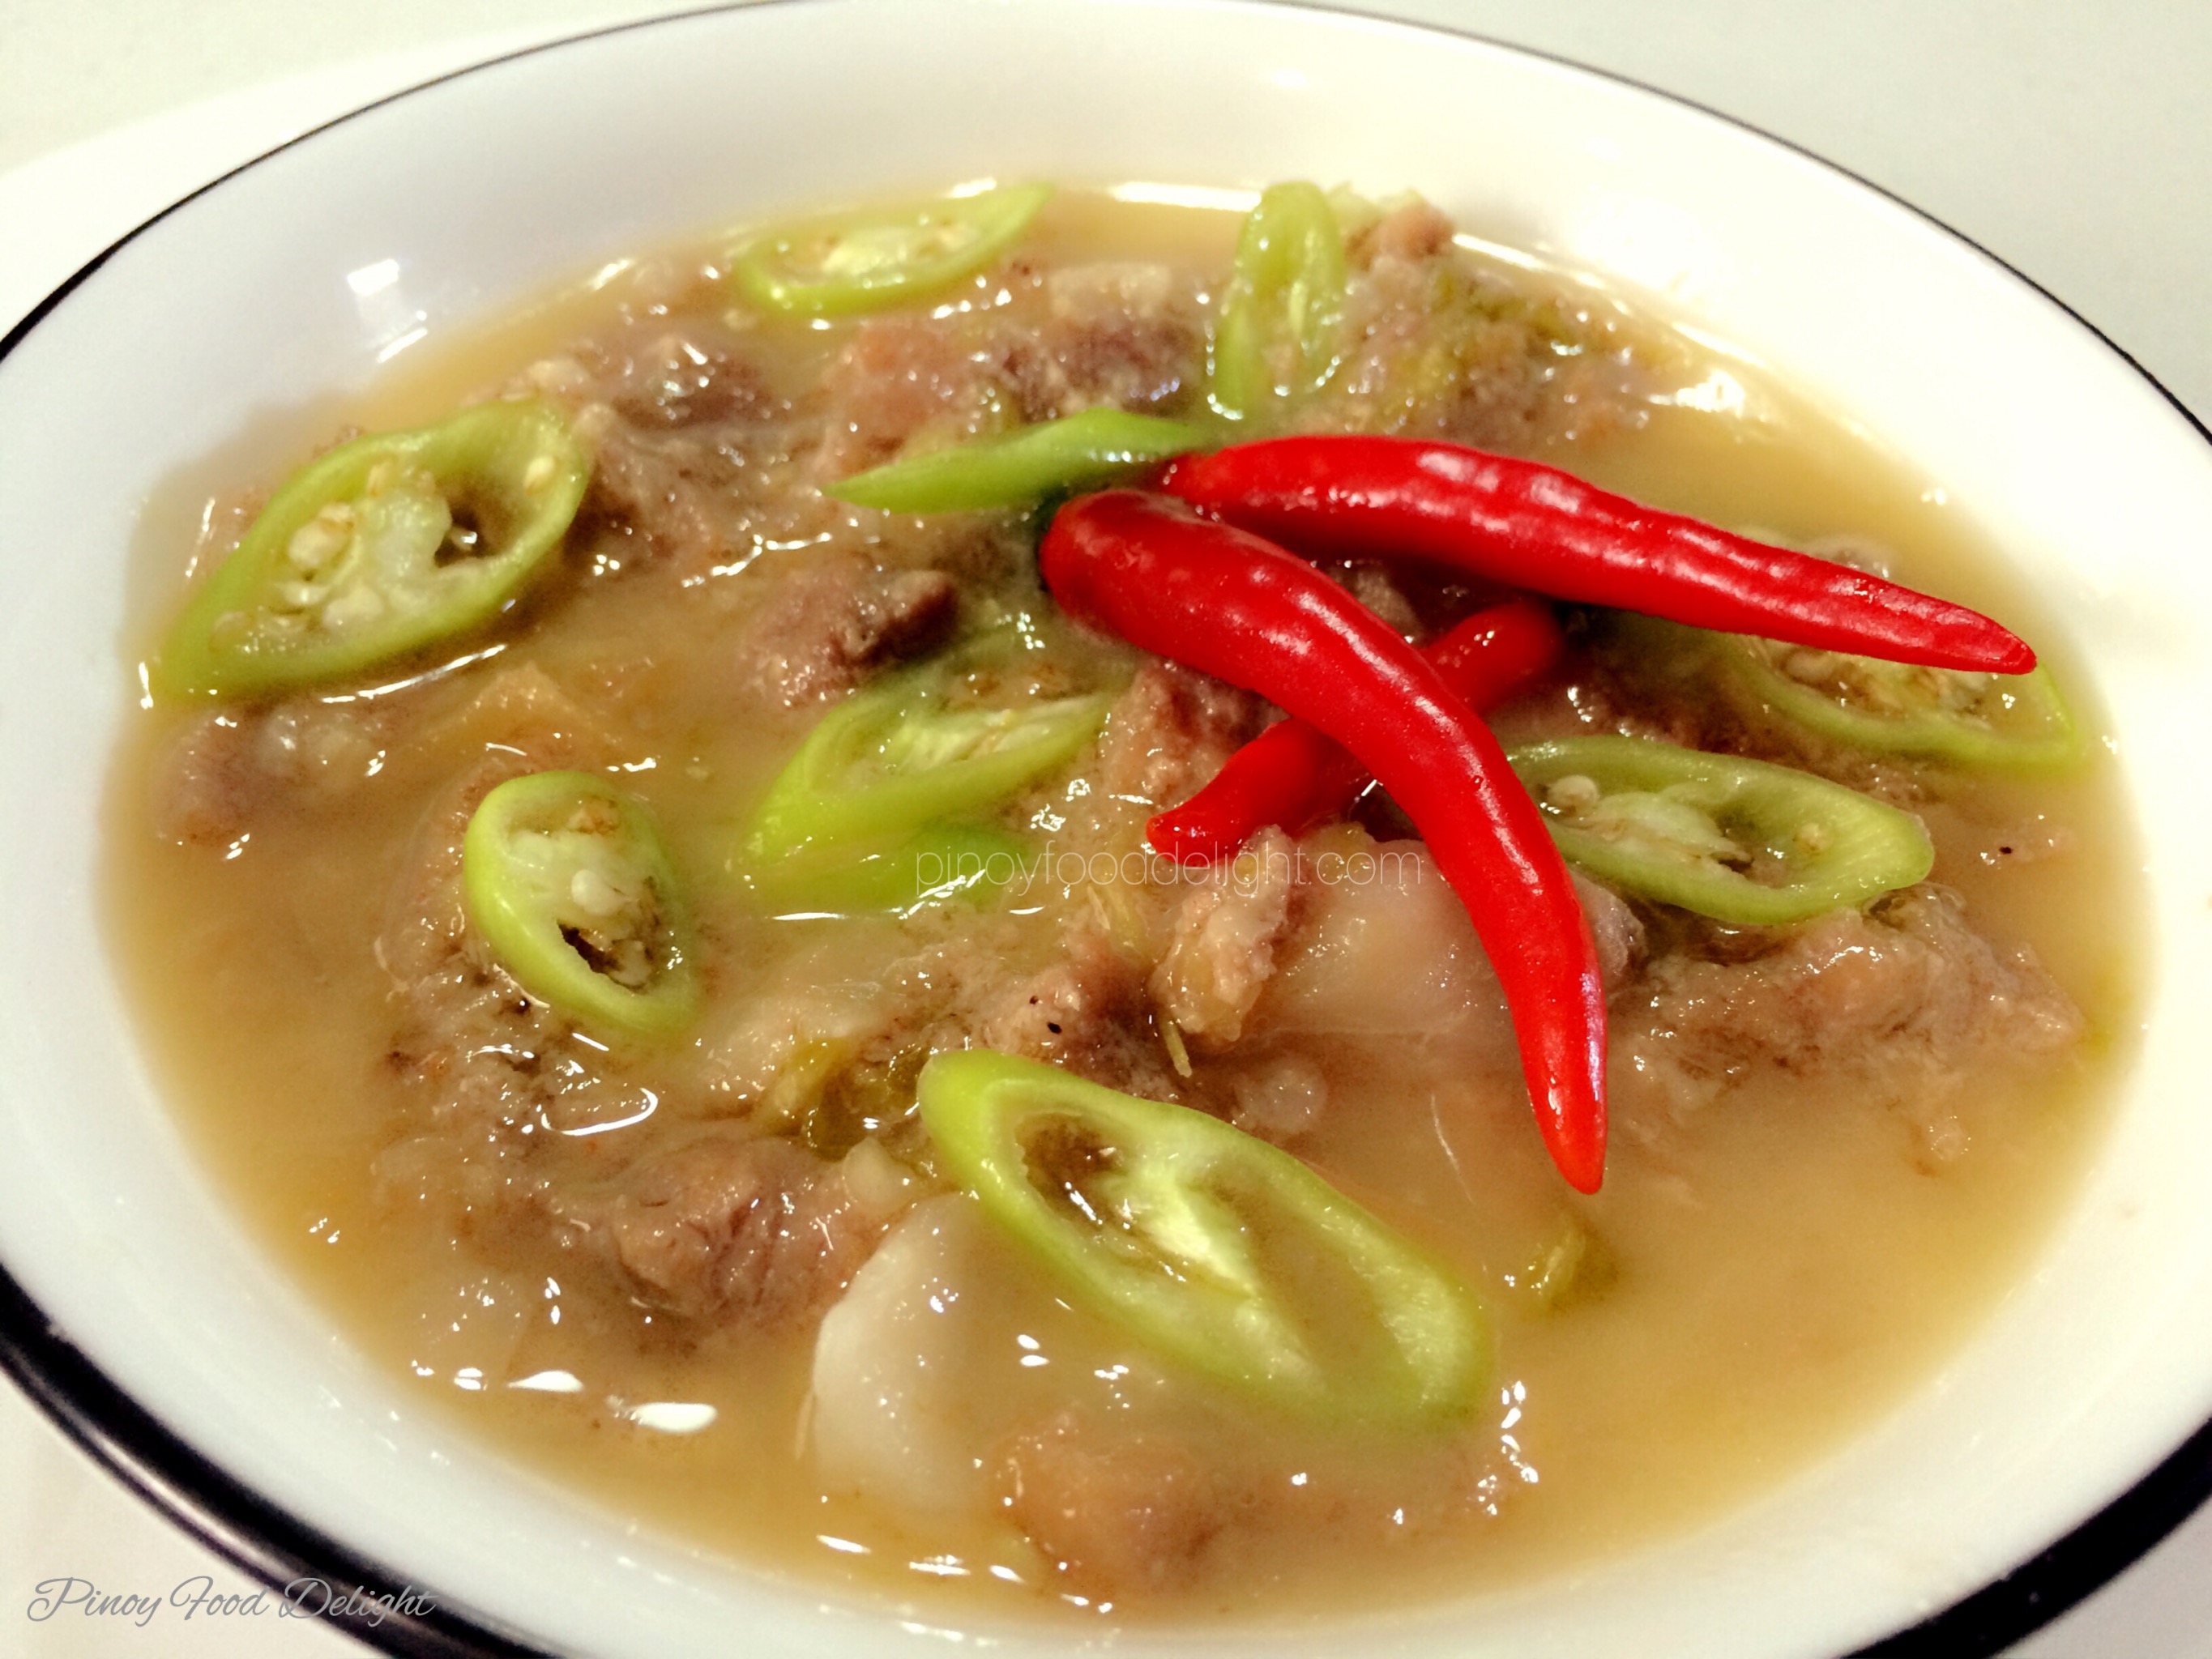 Bicol Express Pinoy Food Delight